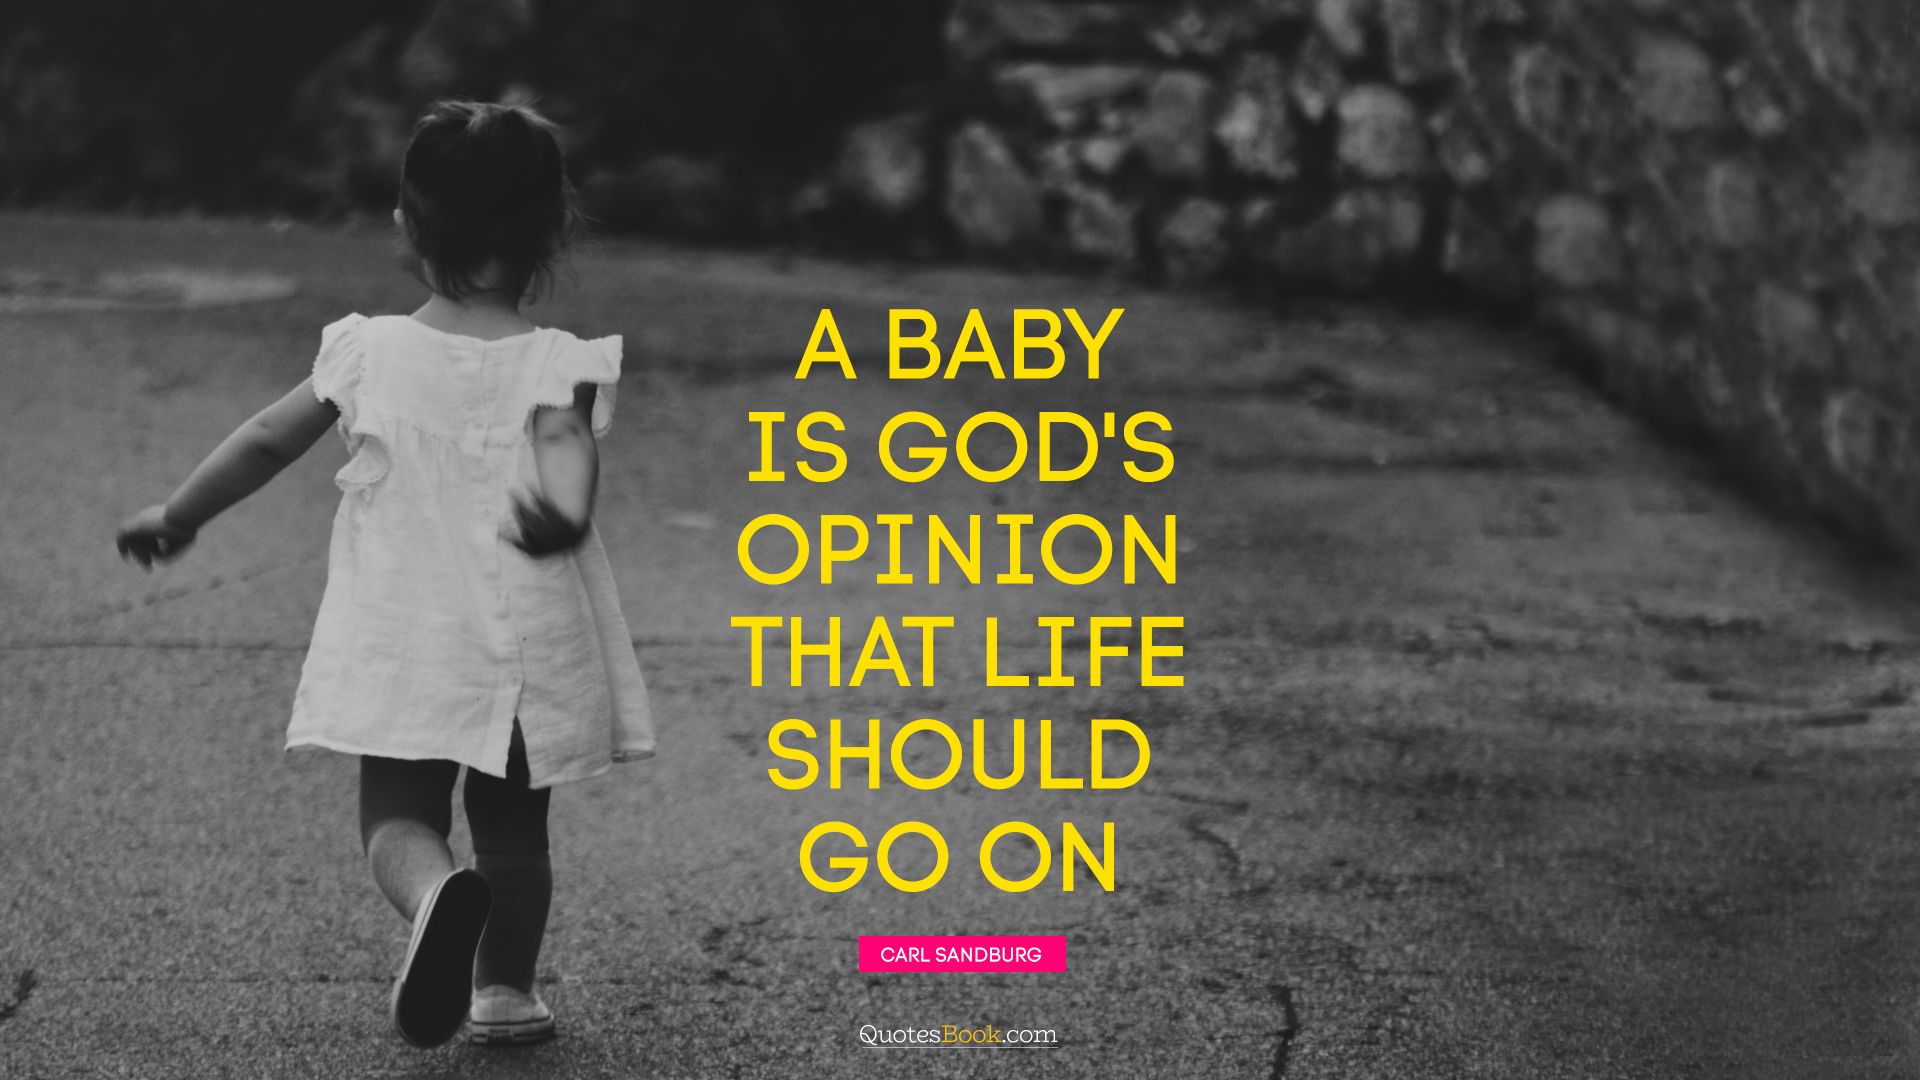 A baby is God's opinion that life should go on. - Quote by Carl Sandburg